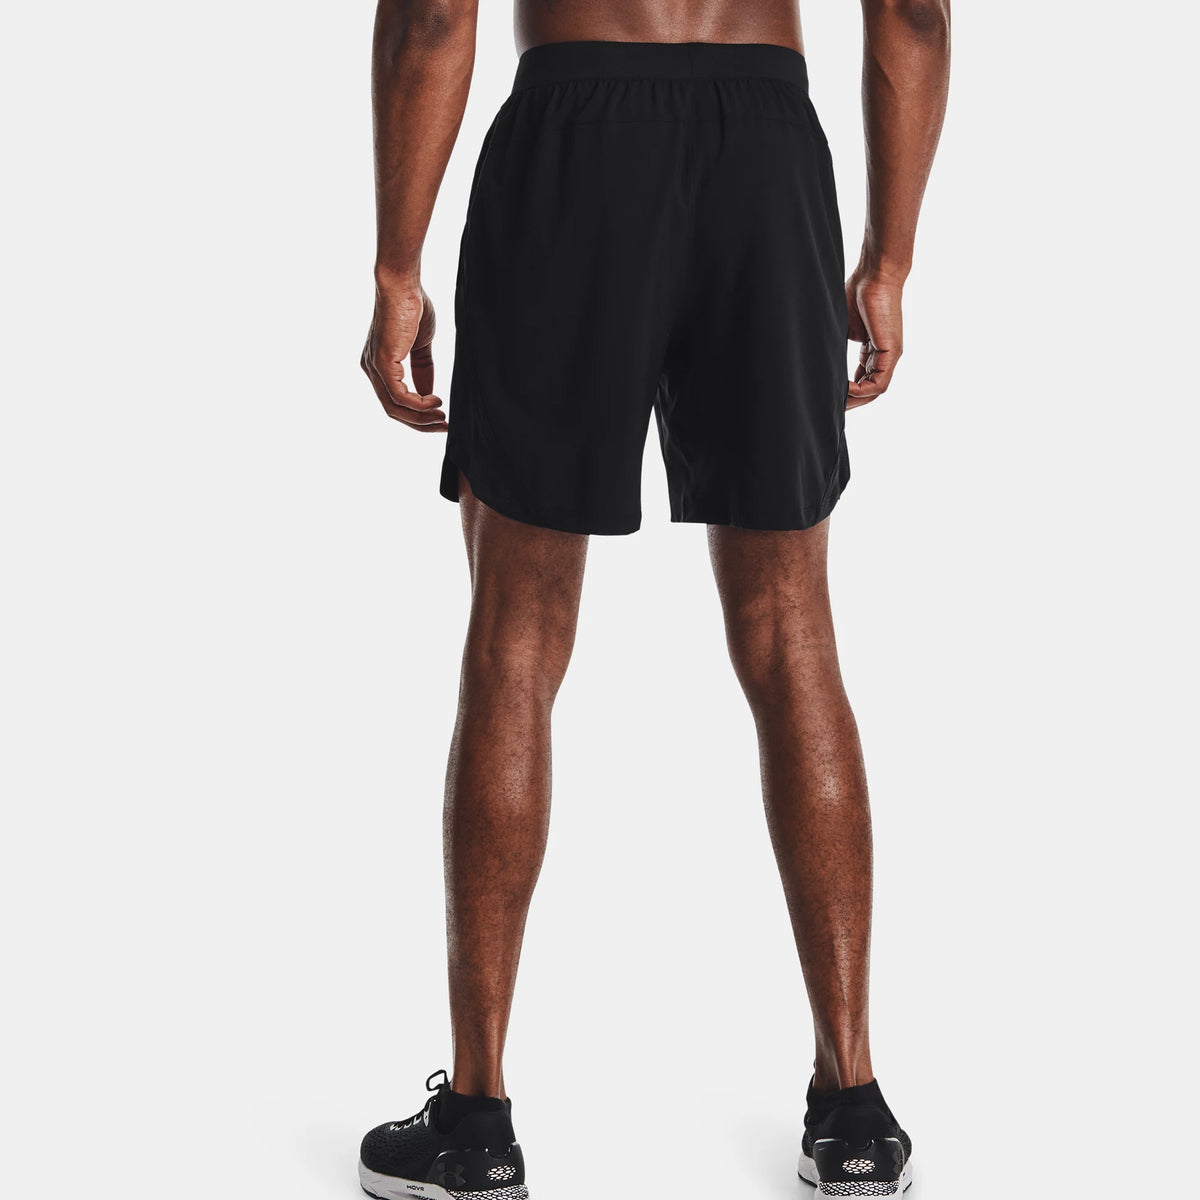 Under Armour Mens Launch 7inch Running Shorts: Black